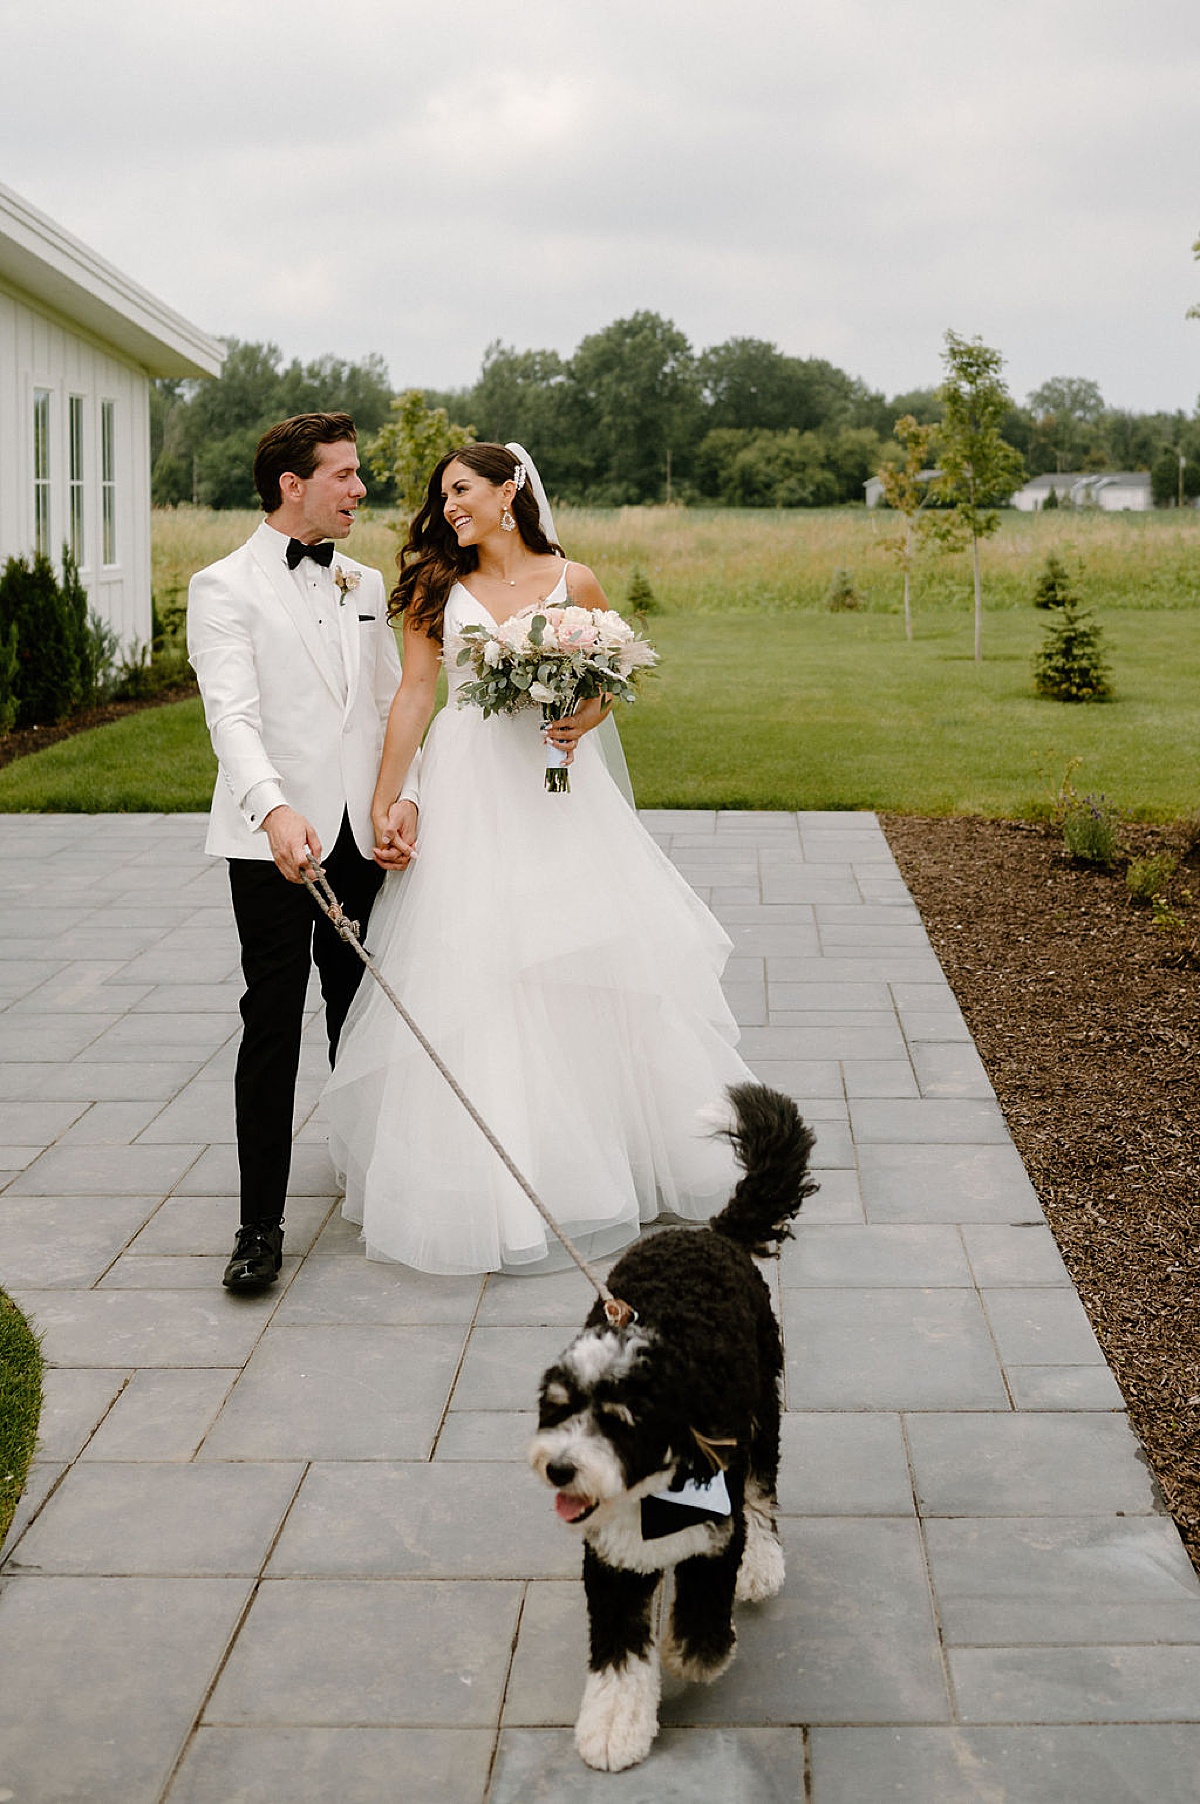 Bride in tulle gown walks hand in hand with groom in white dinner jacket as they walk doodle puppy on a leash at ceremony shot by Michigan wedding photographer